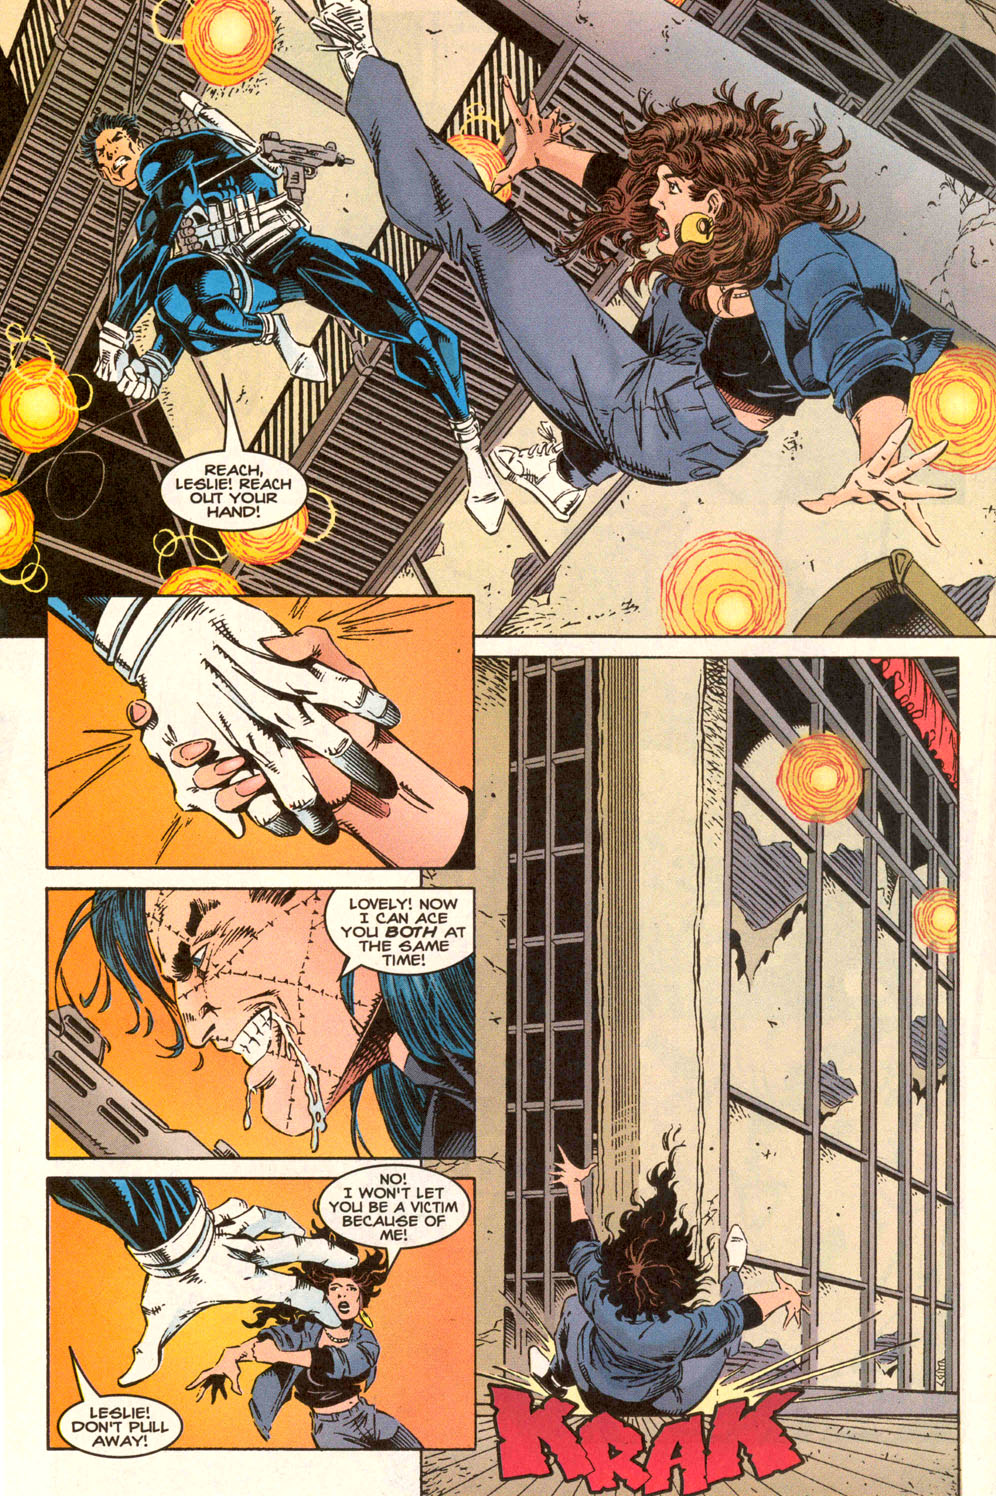 Punisher (1995) issue 10 - Last Shot Fired - Page 21